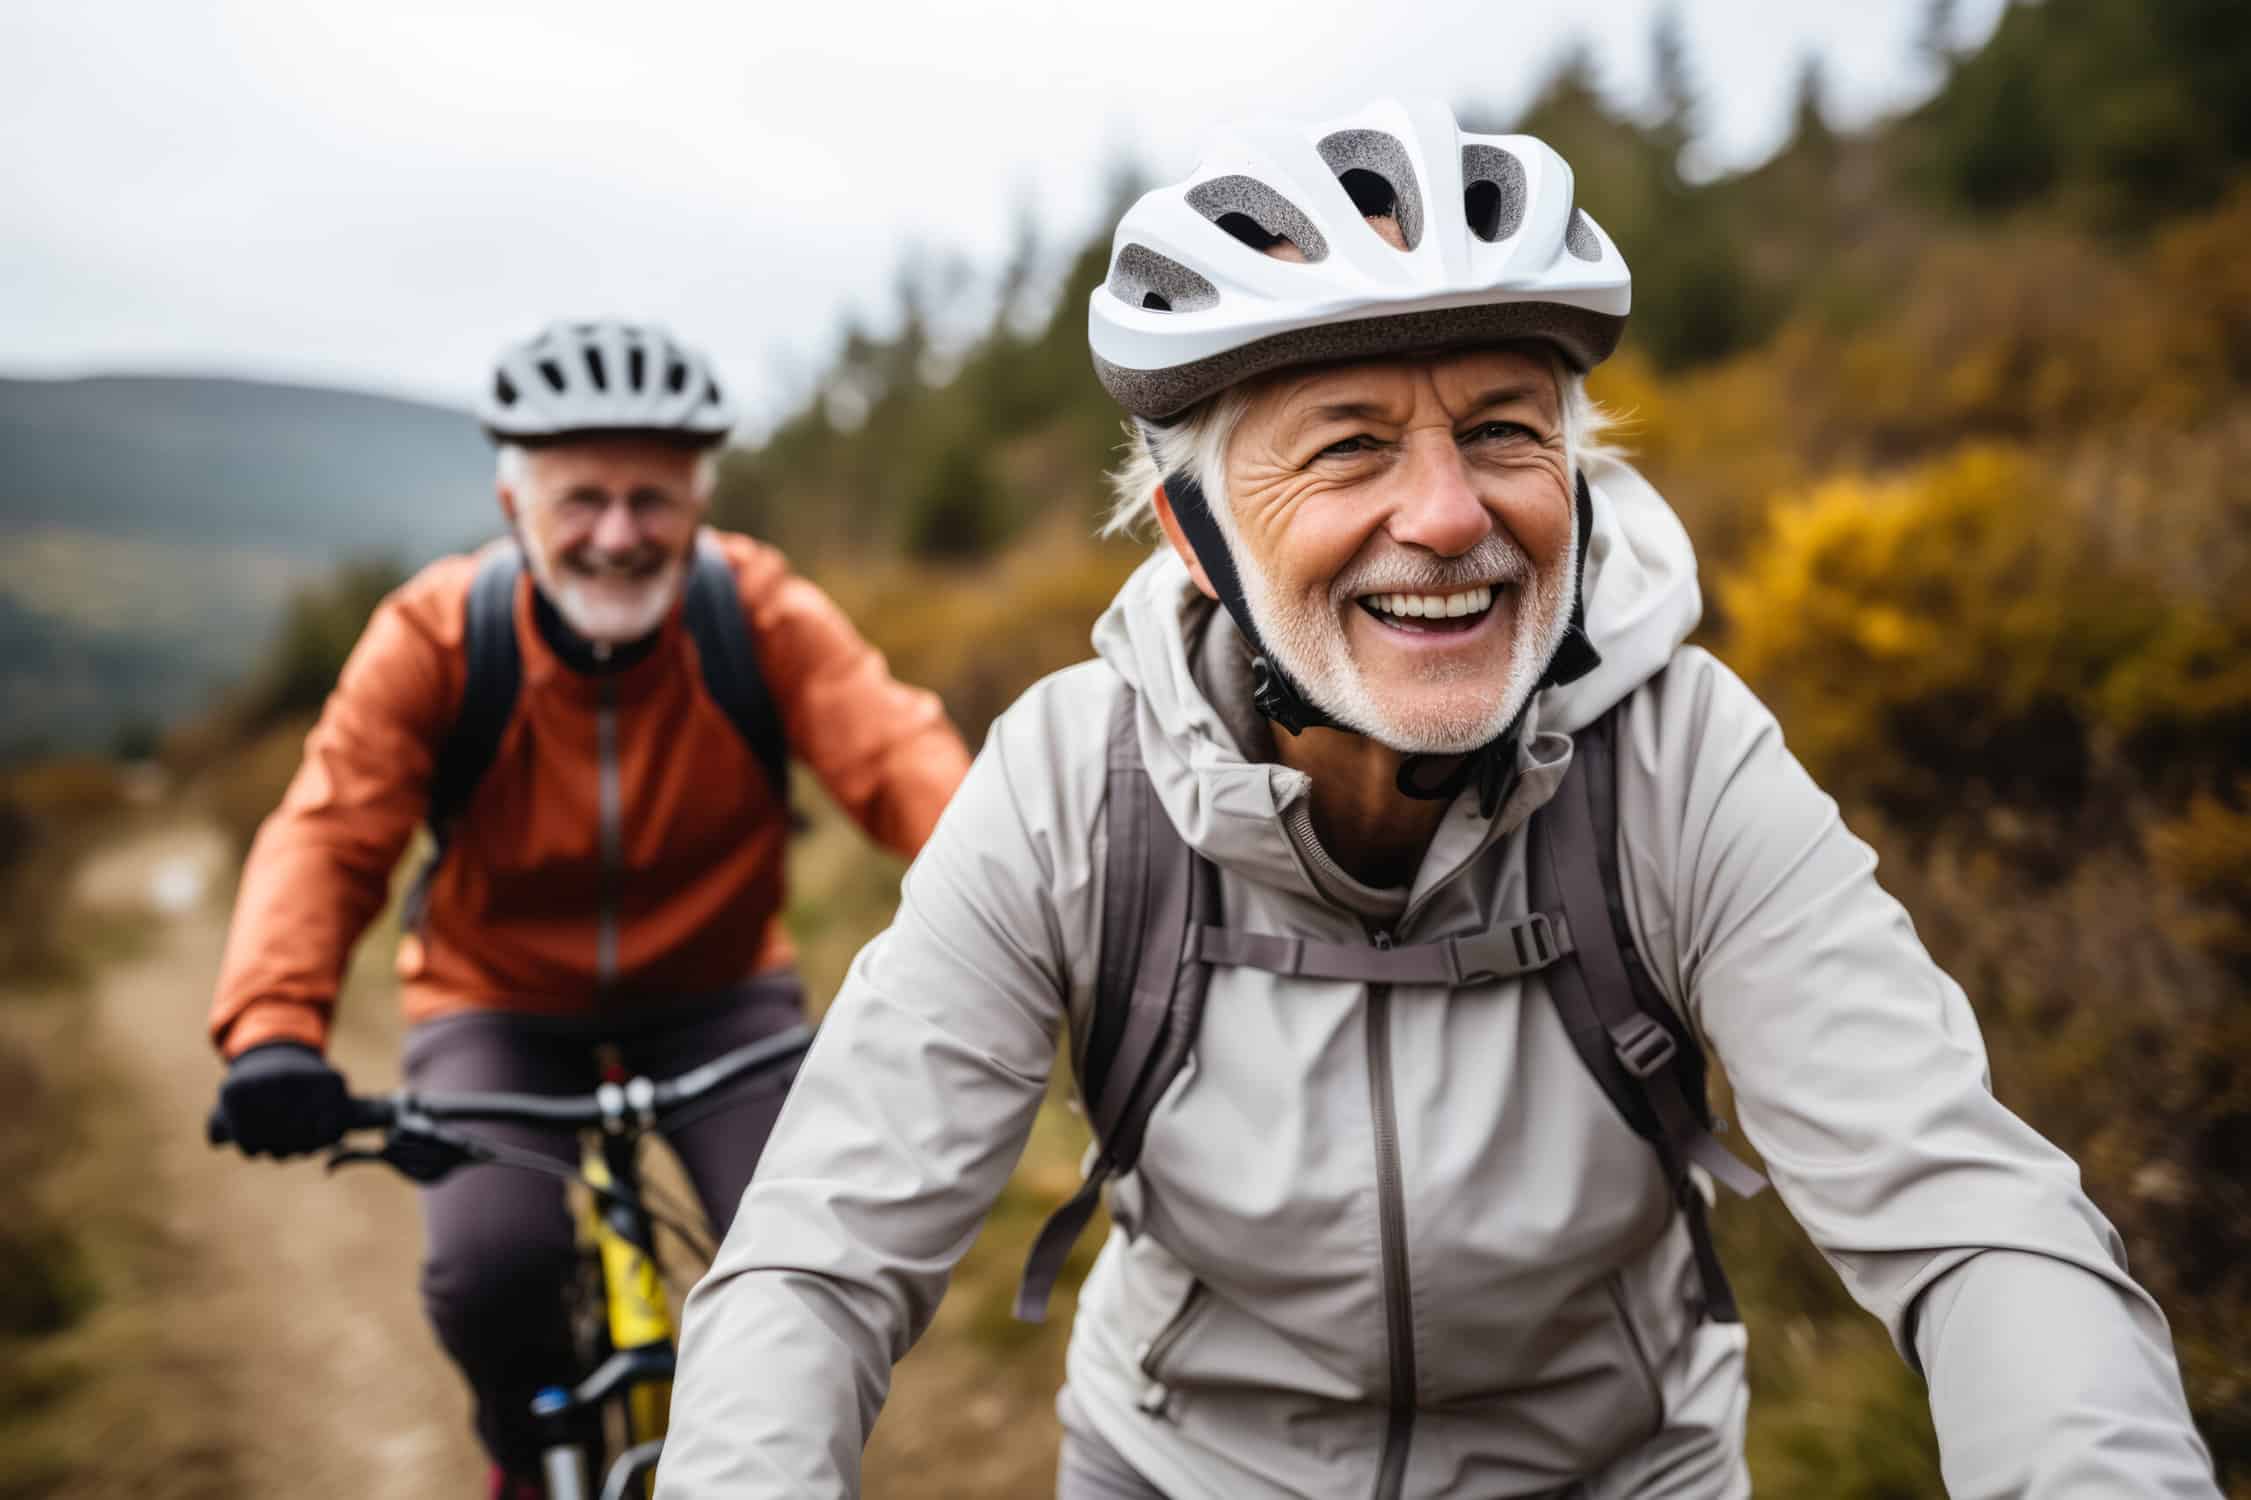 physical therapy for seniors active couple riding through countryside